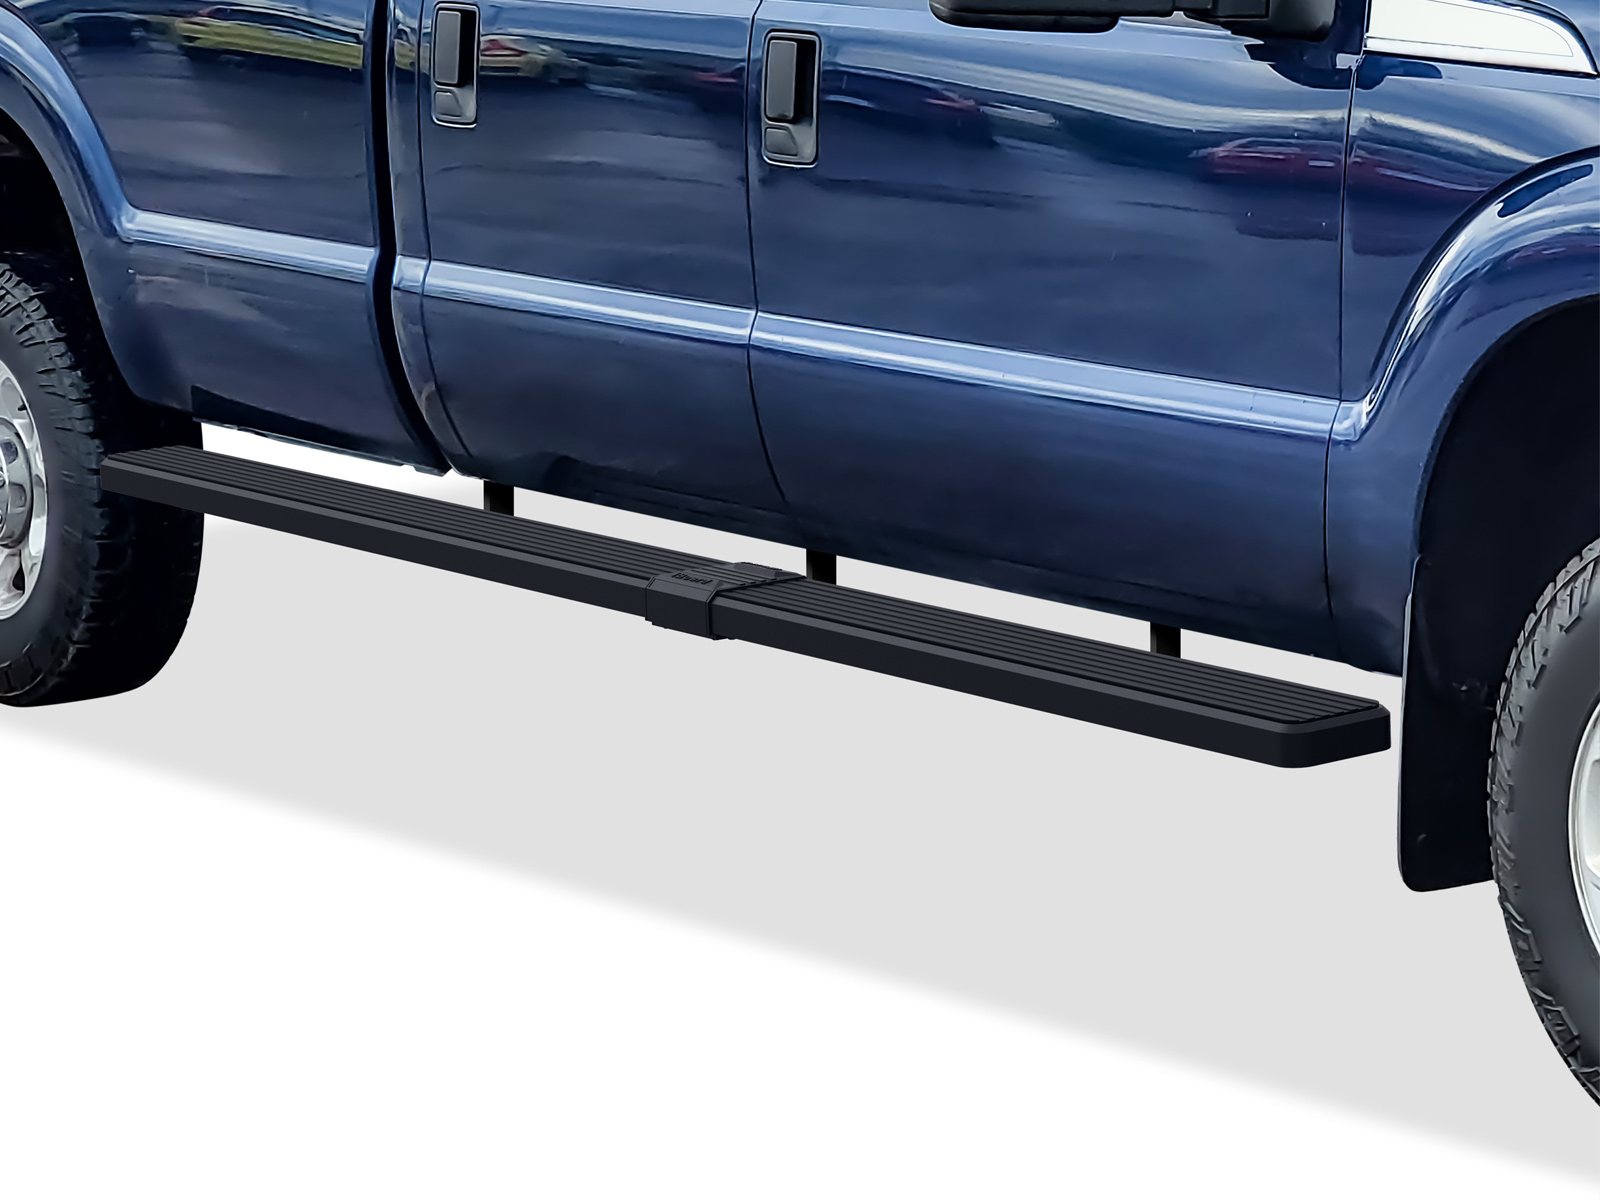 1999-2016 Ford F-250/F-350/F-450/F-550 Super Duty Crew Cab 6.5 ft Bed Both Sides iStep W2W 6 Inch Stainless Steel